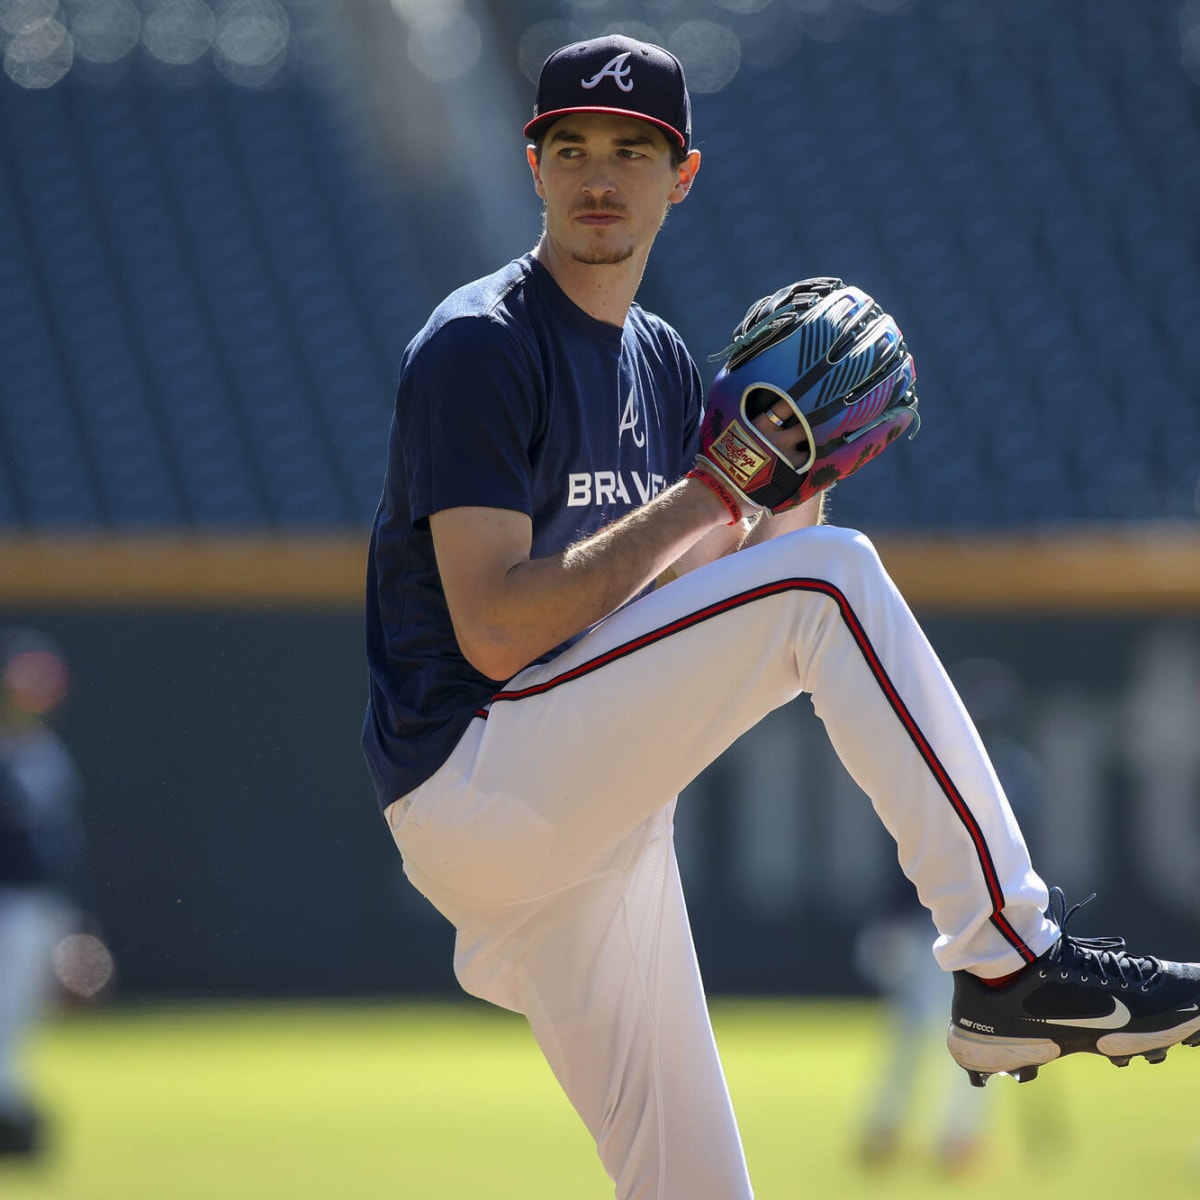 Predicting the 2023 stats of each Braves player — Max Fried